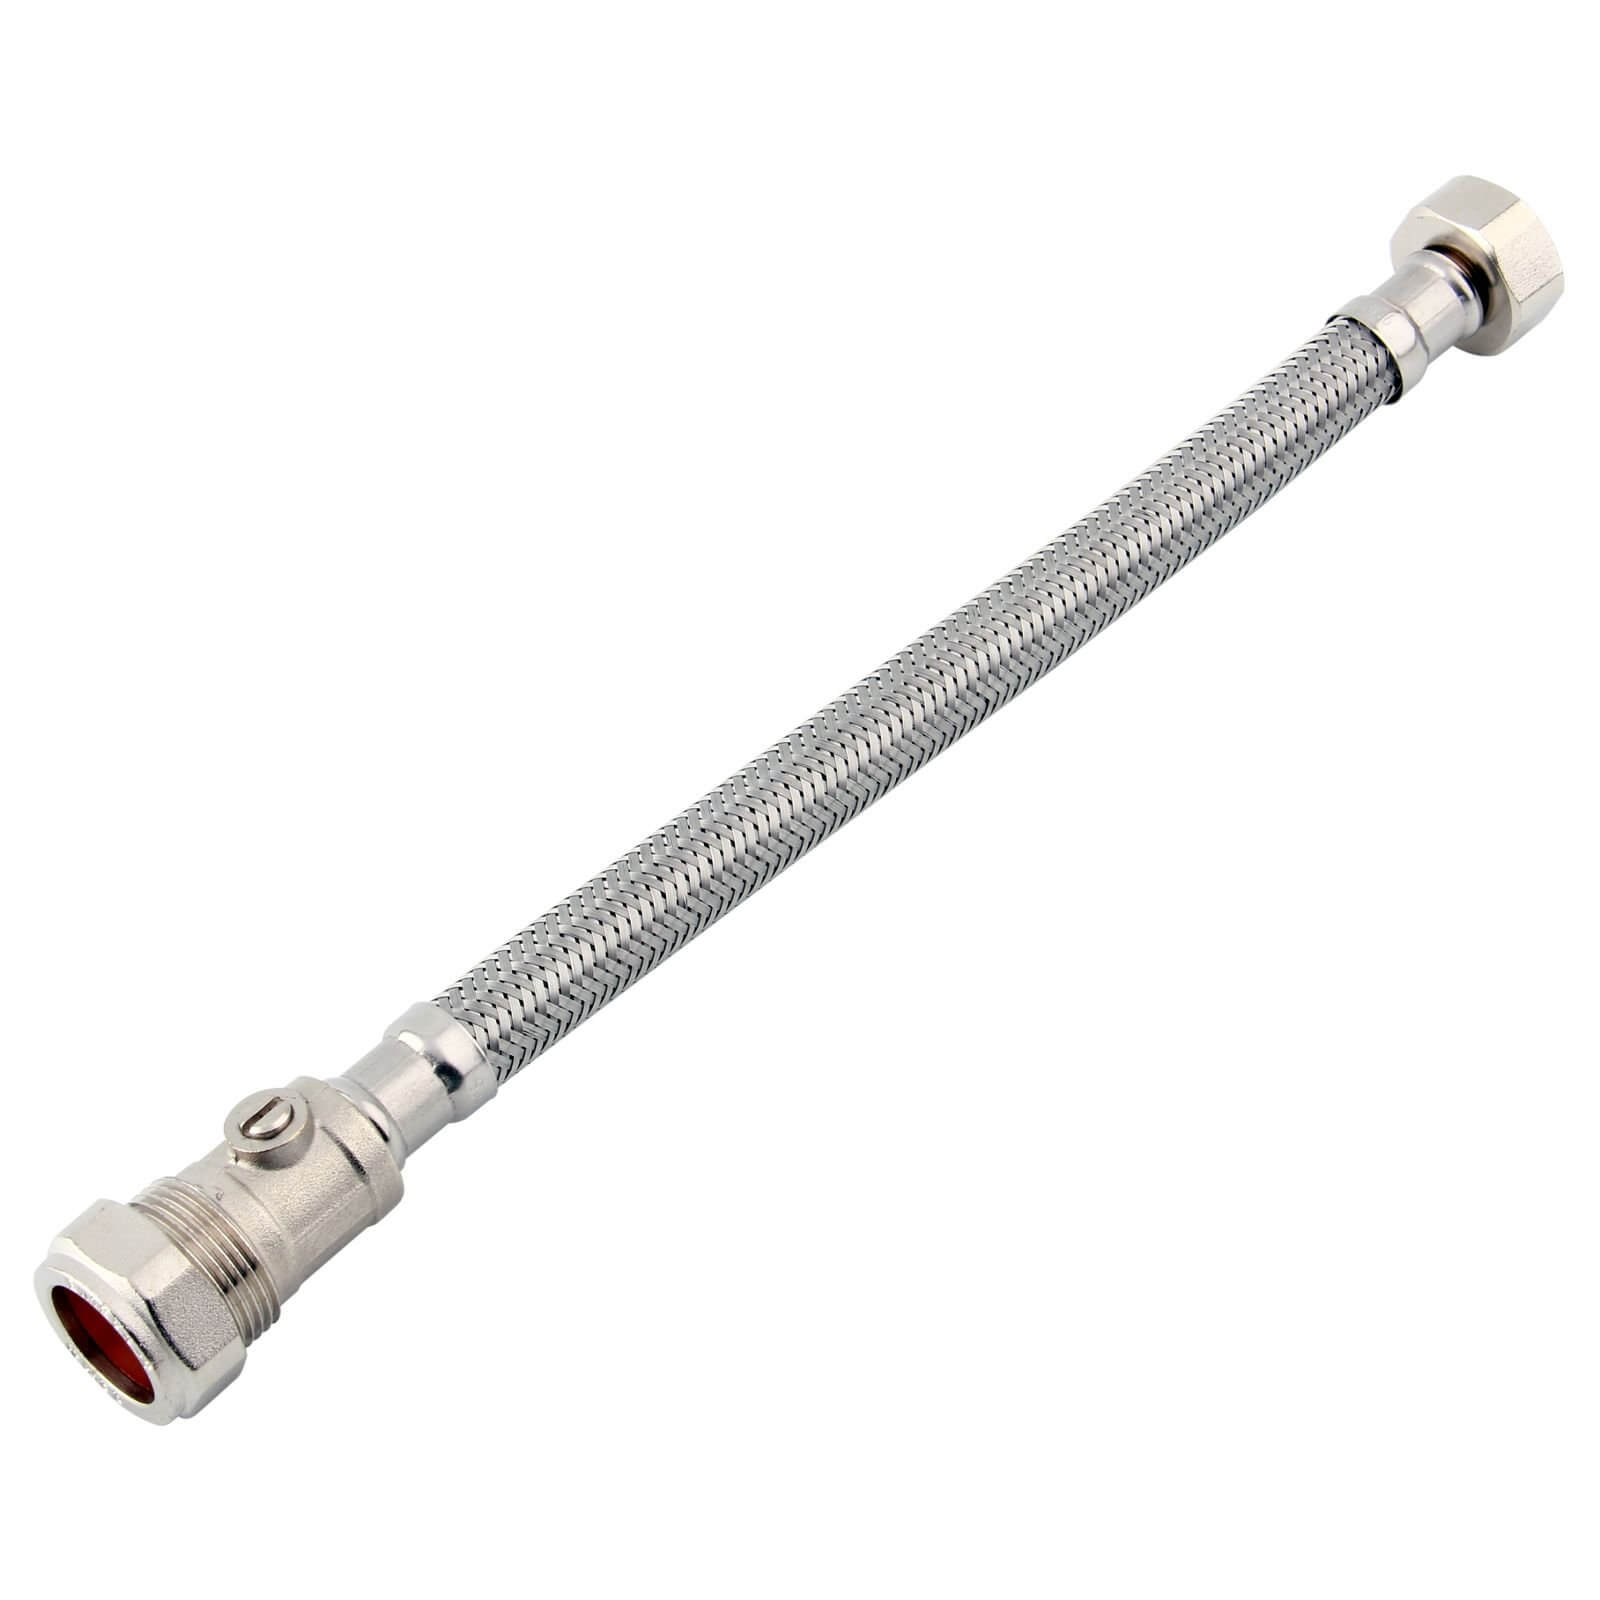 Kinetic Flexible Tap Connector - 22mm Valve x 3/4in x 300mm - WRAS Approved